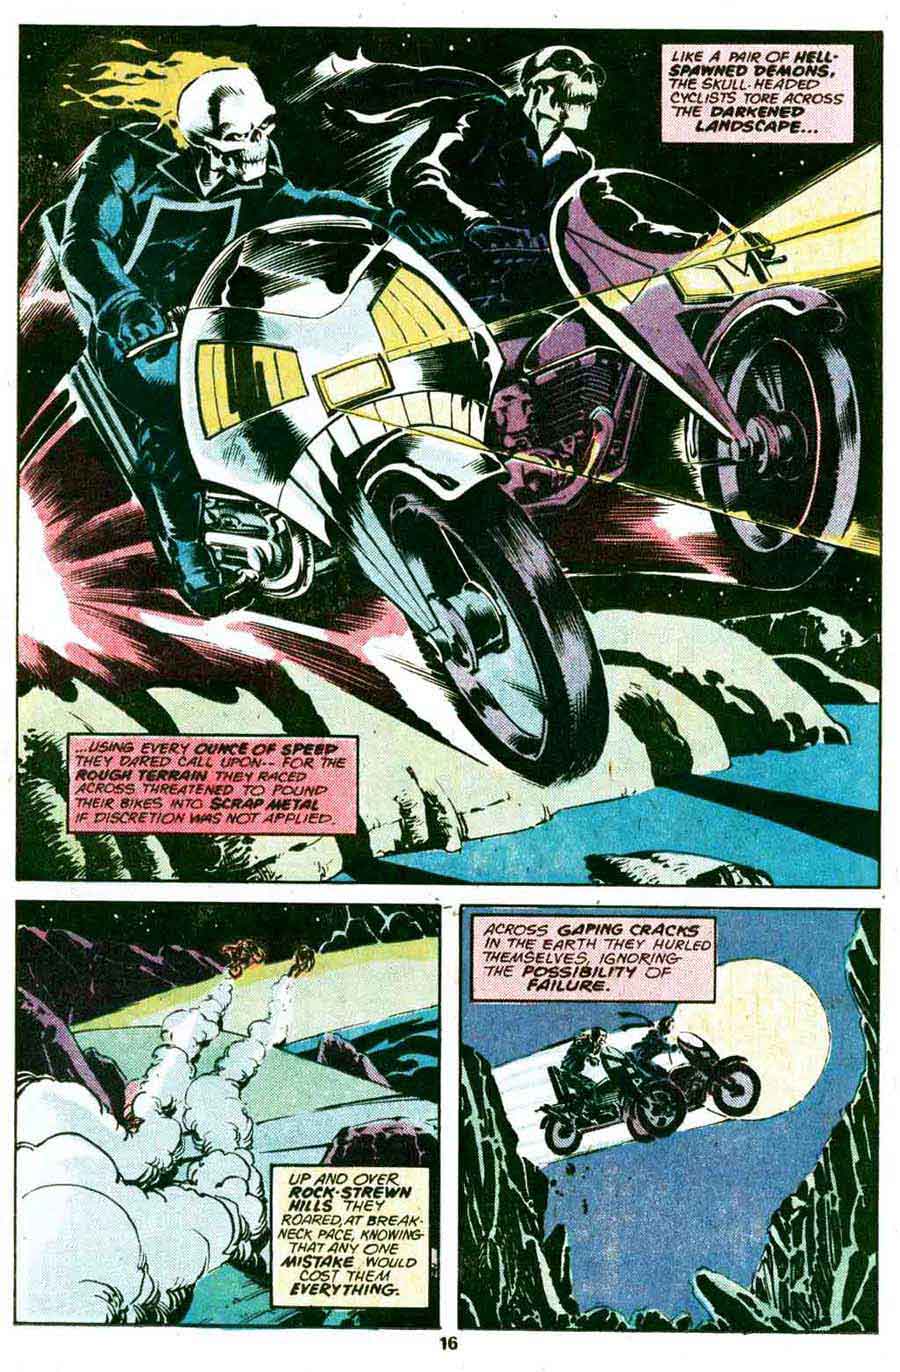 Ghost Rider v3 #35 marvel comic book page art by Jim Starlin